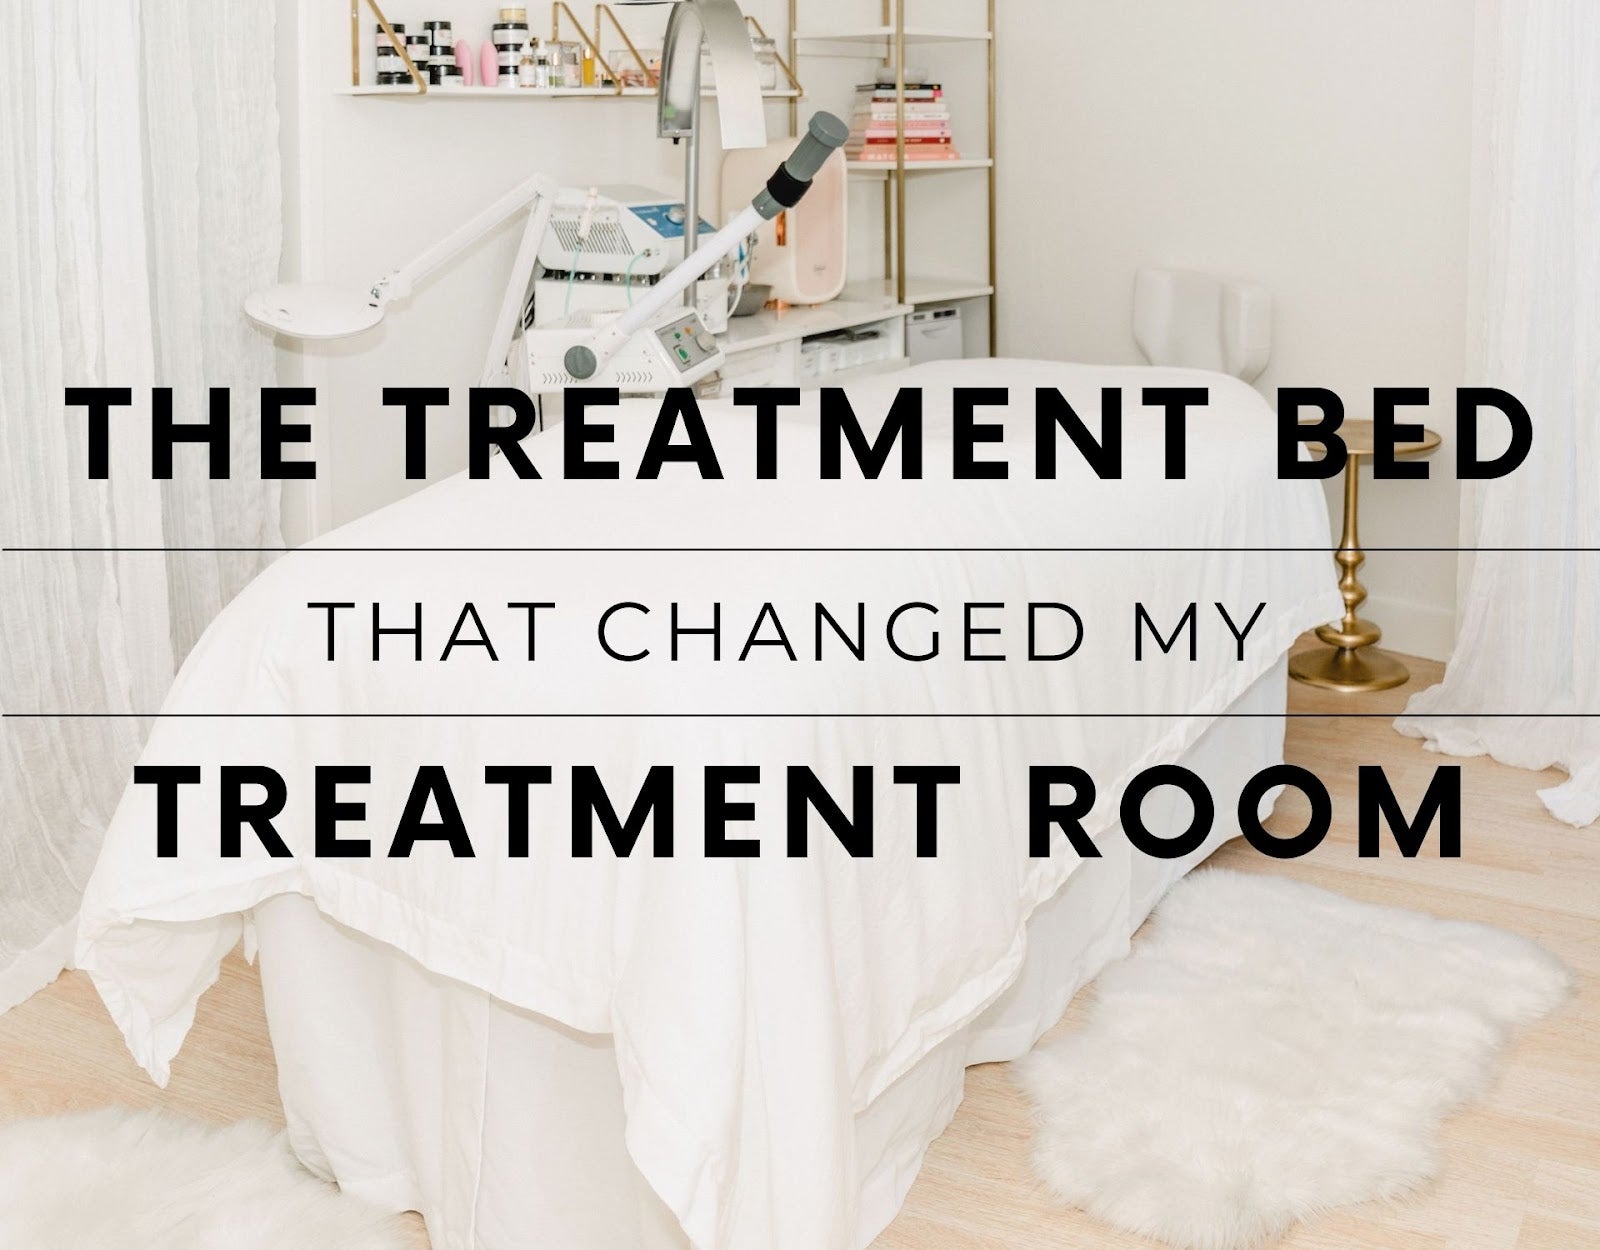 The Treatment Bed That Changed My Treatment Room